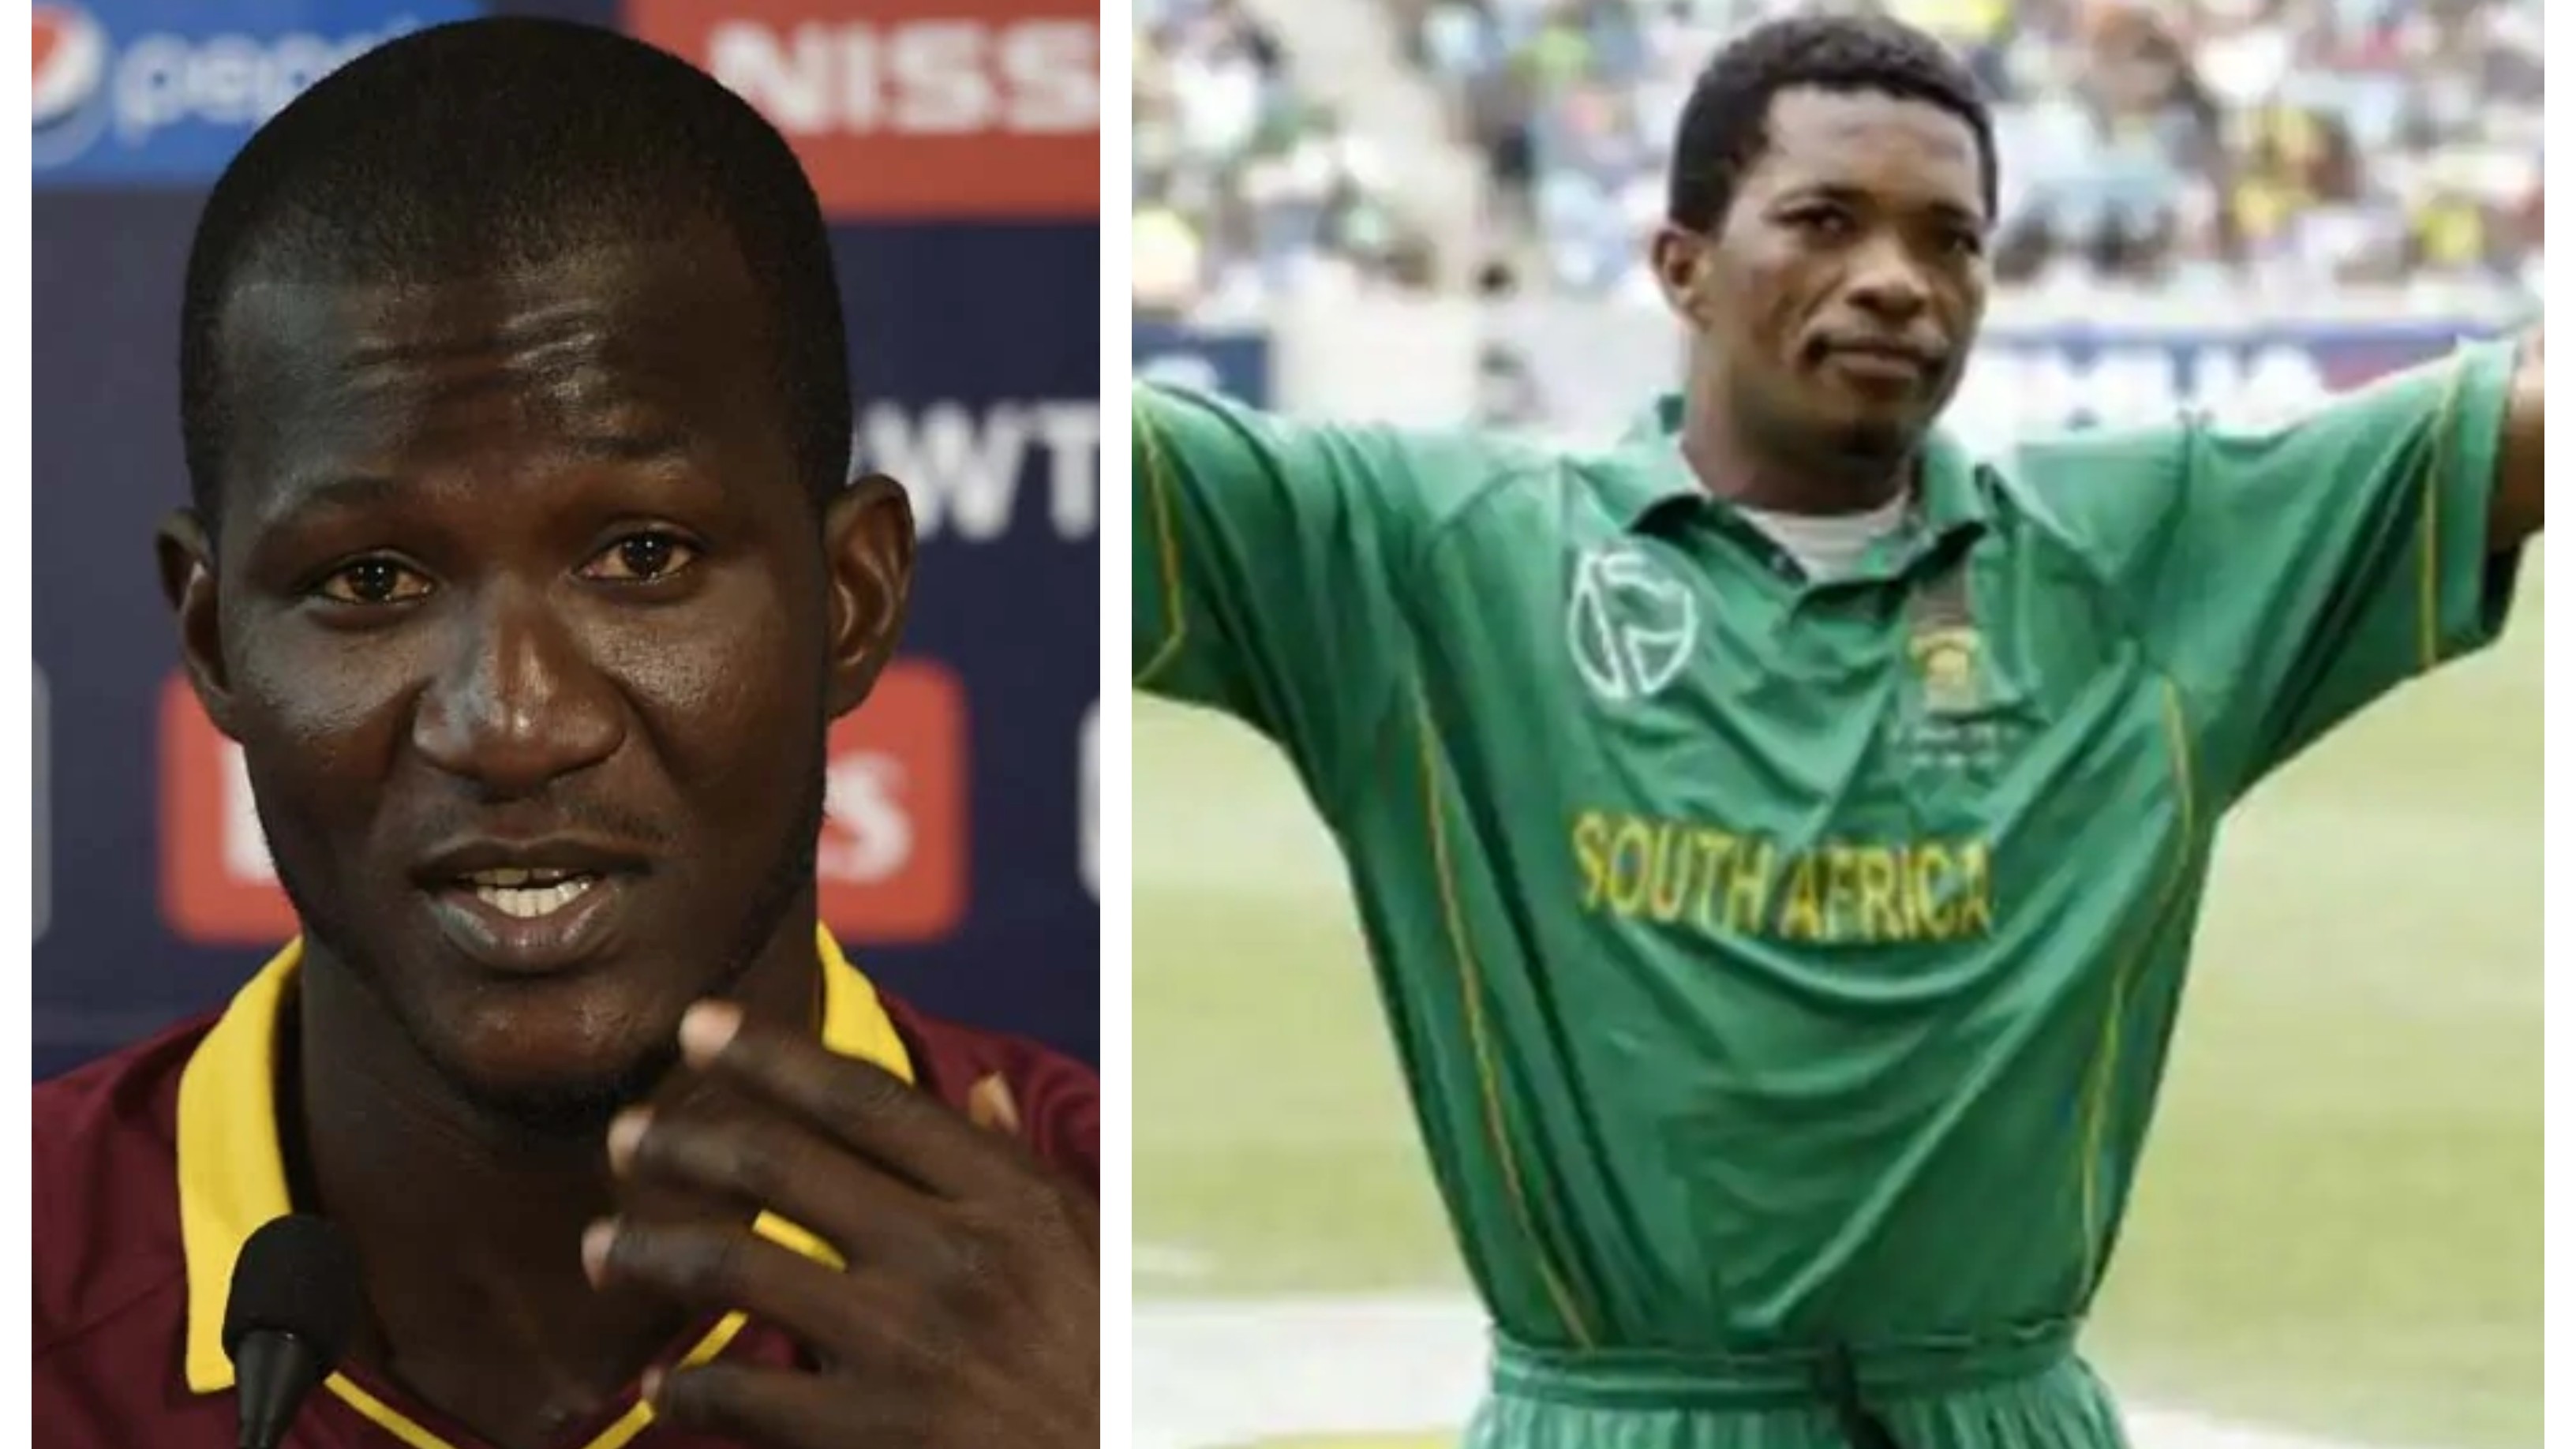 ‘Shame on his teammates’, Sammy stands with Ntini after latter reveals facing racism in South African cricket